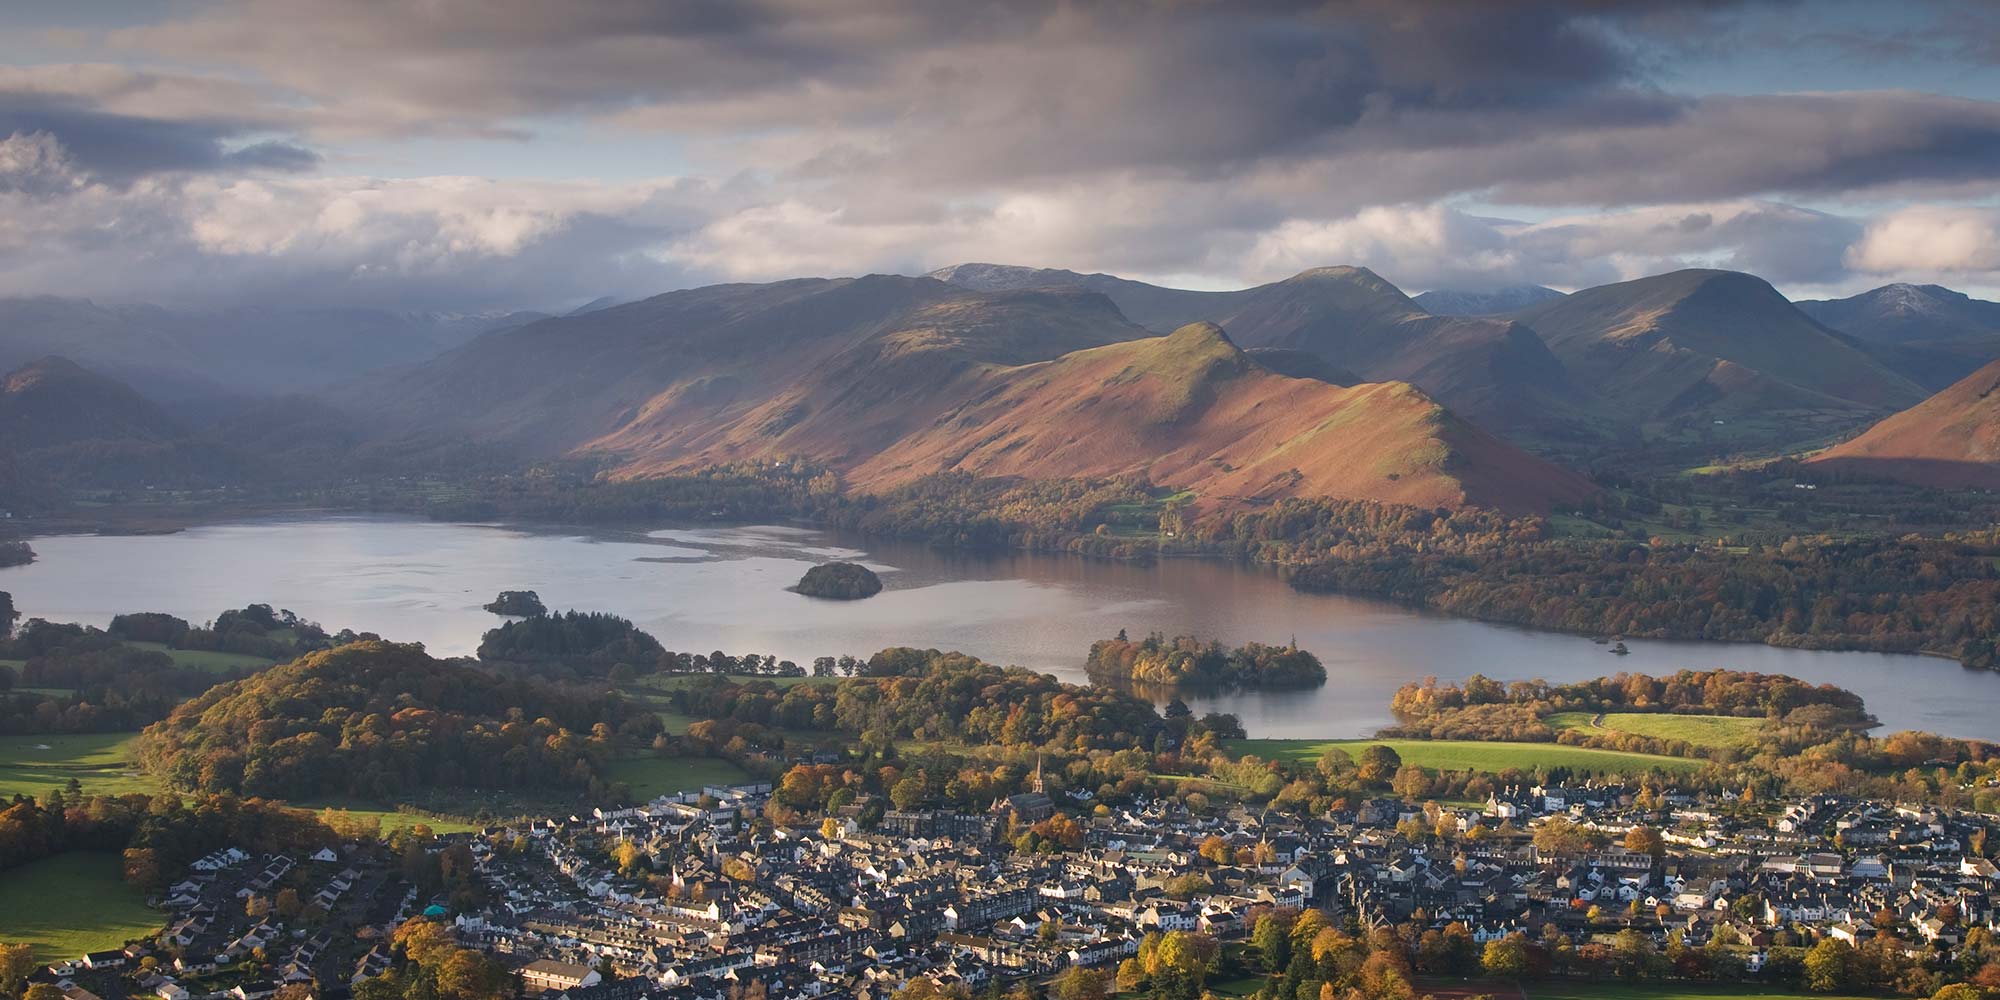 View over a lake nestled between high fells with a town on the near shore